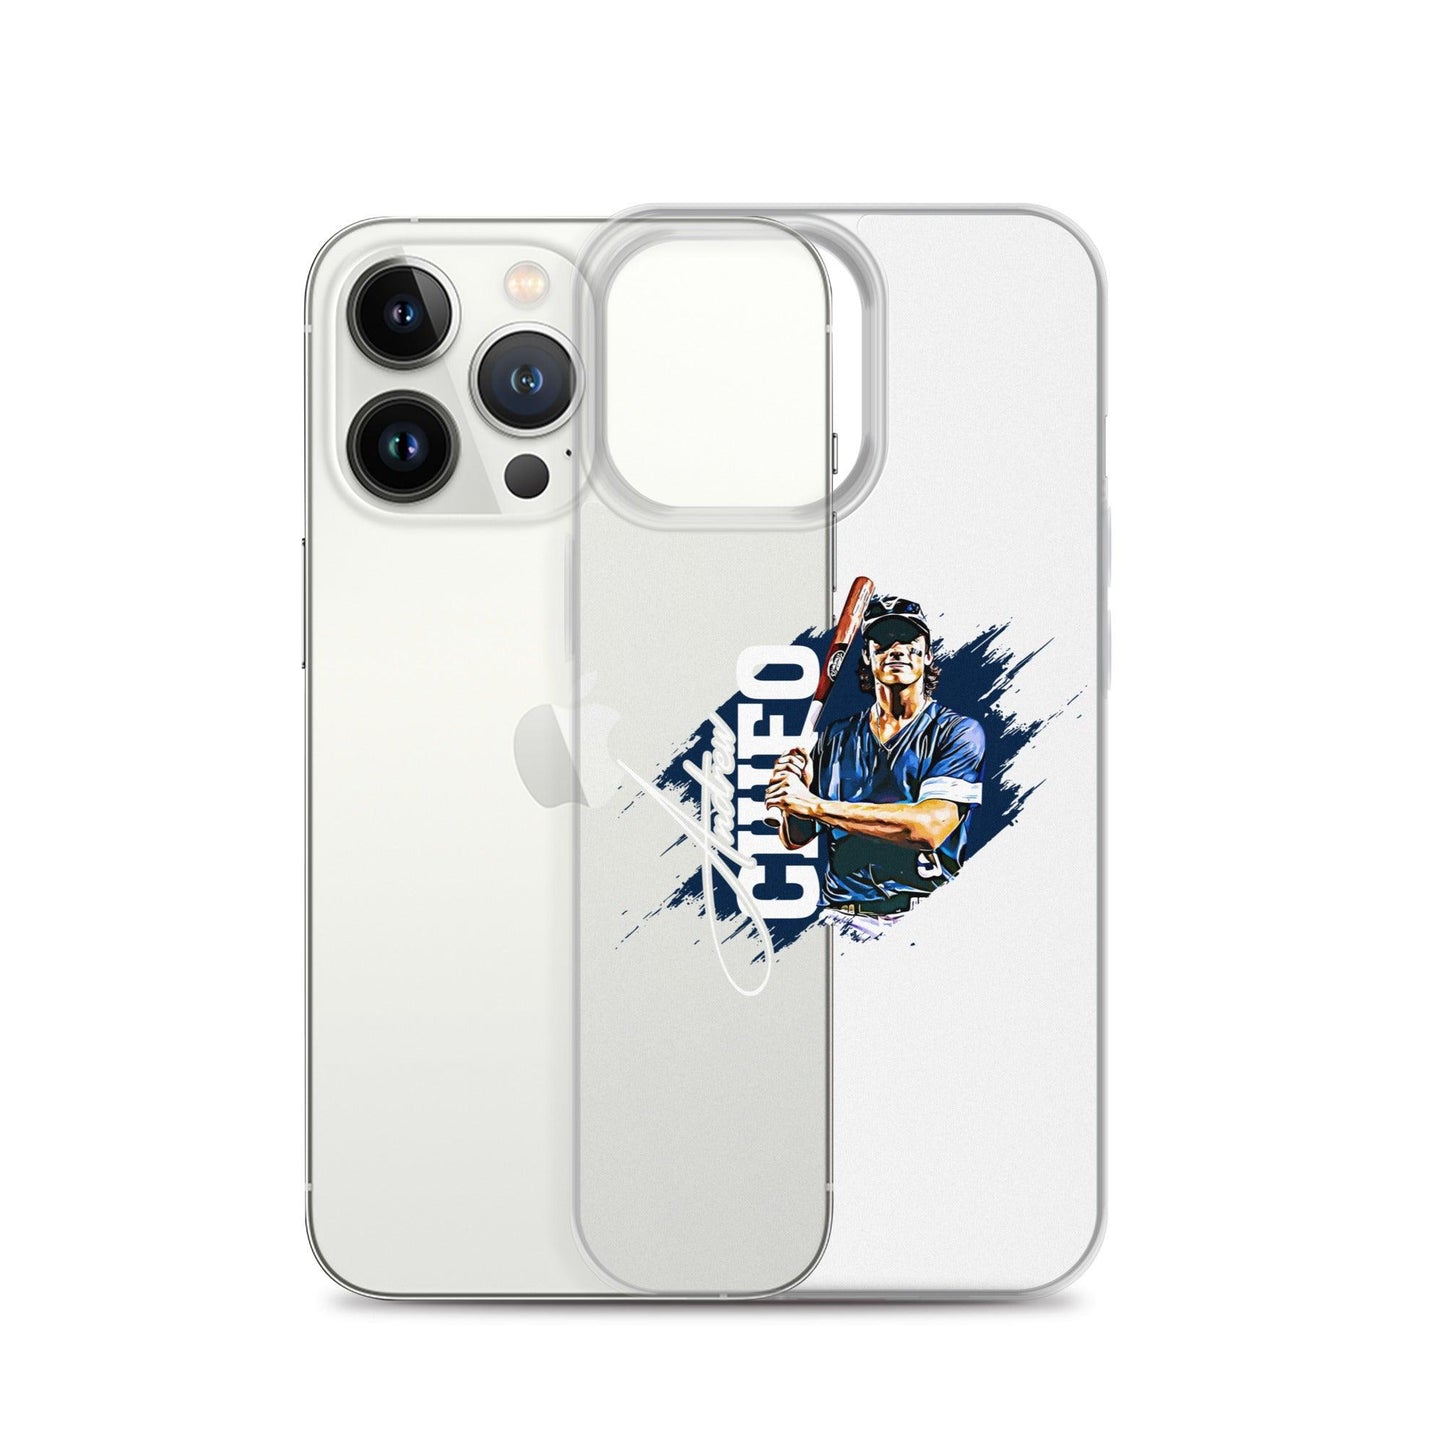 Andrew Ciufo "Gameday" iPhone Case - Fan Arch